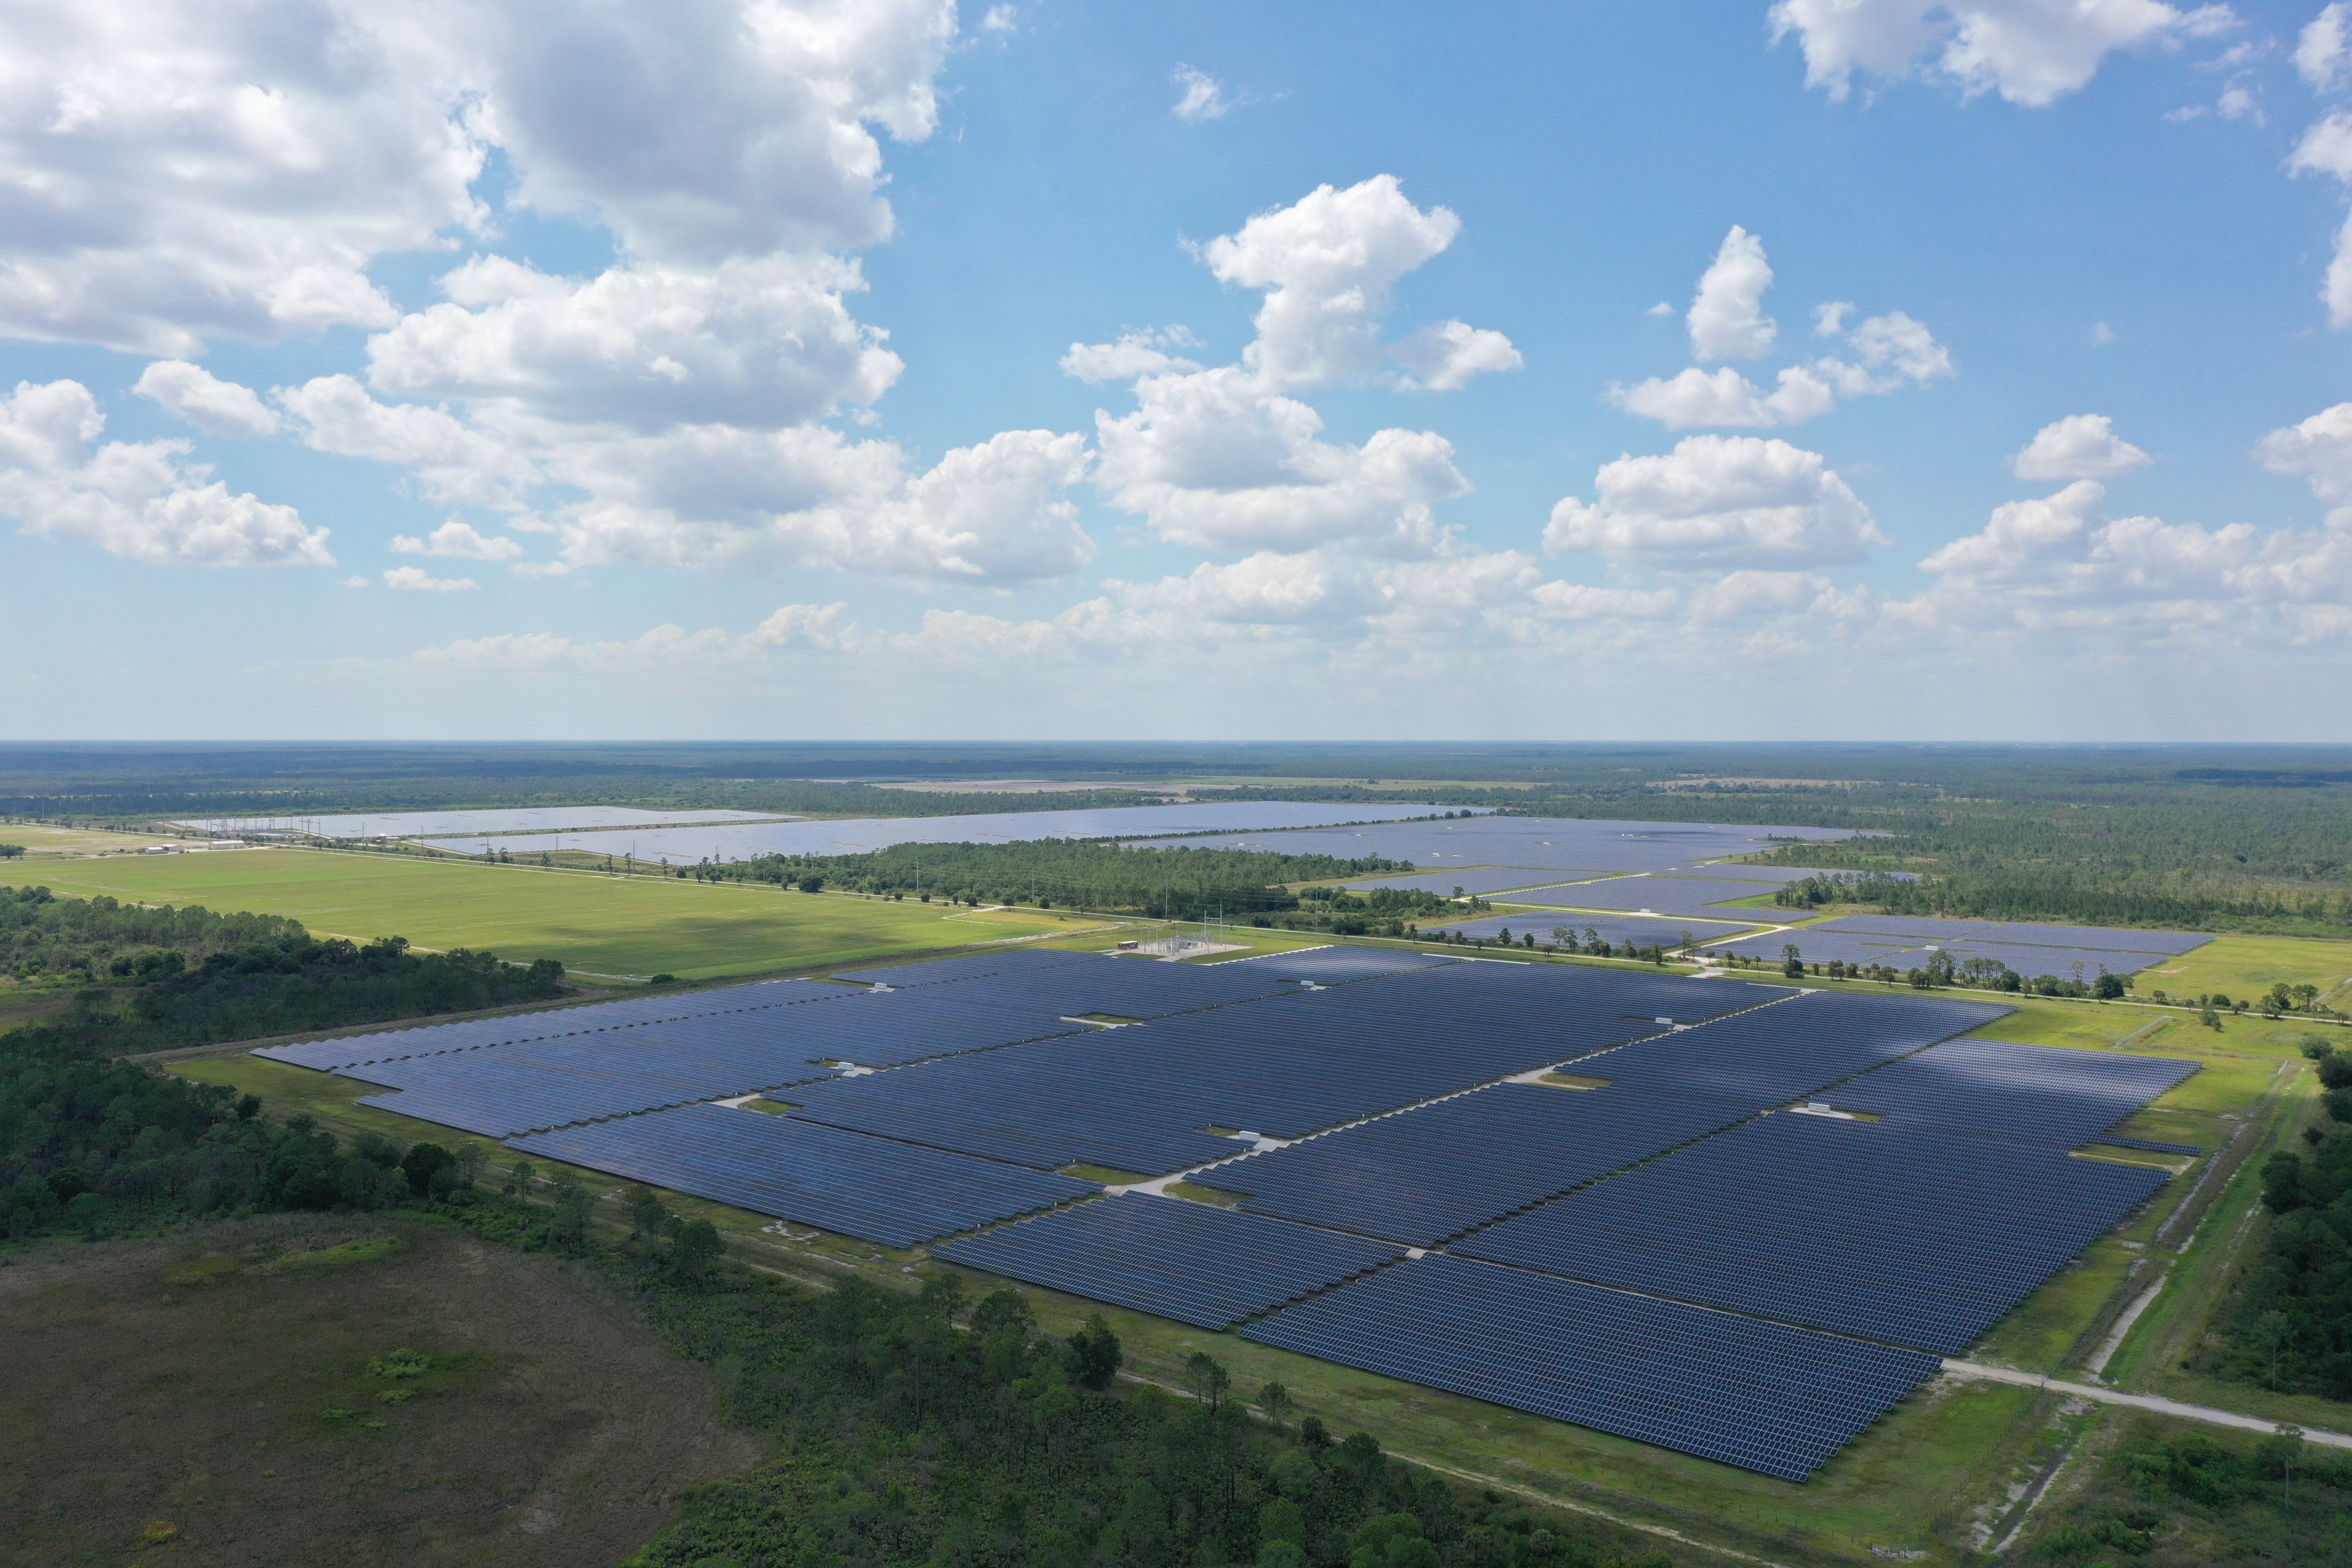 The solar farm that provided Babcock Ranch with clean energy throughout Hurricane Ian. (Lisa Hall)